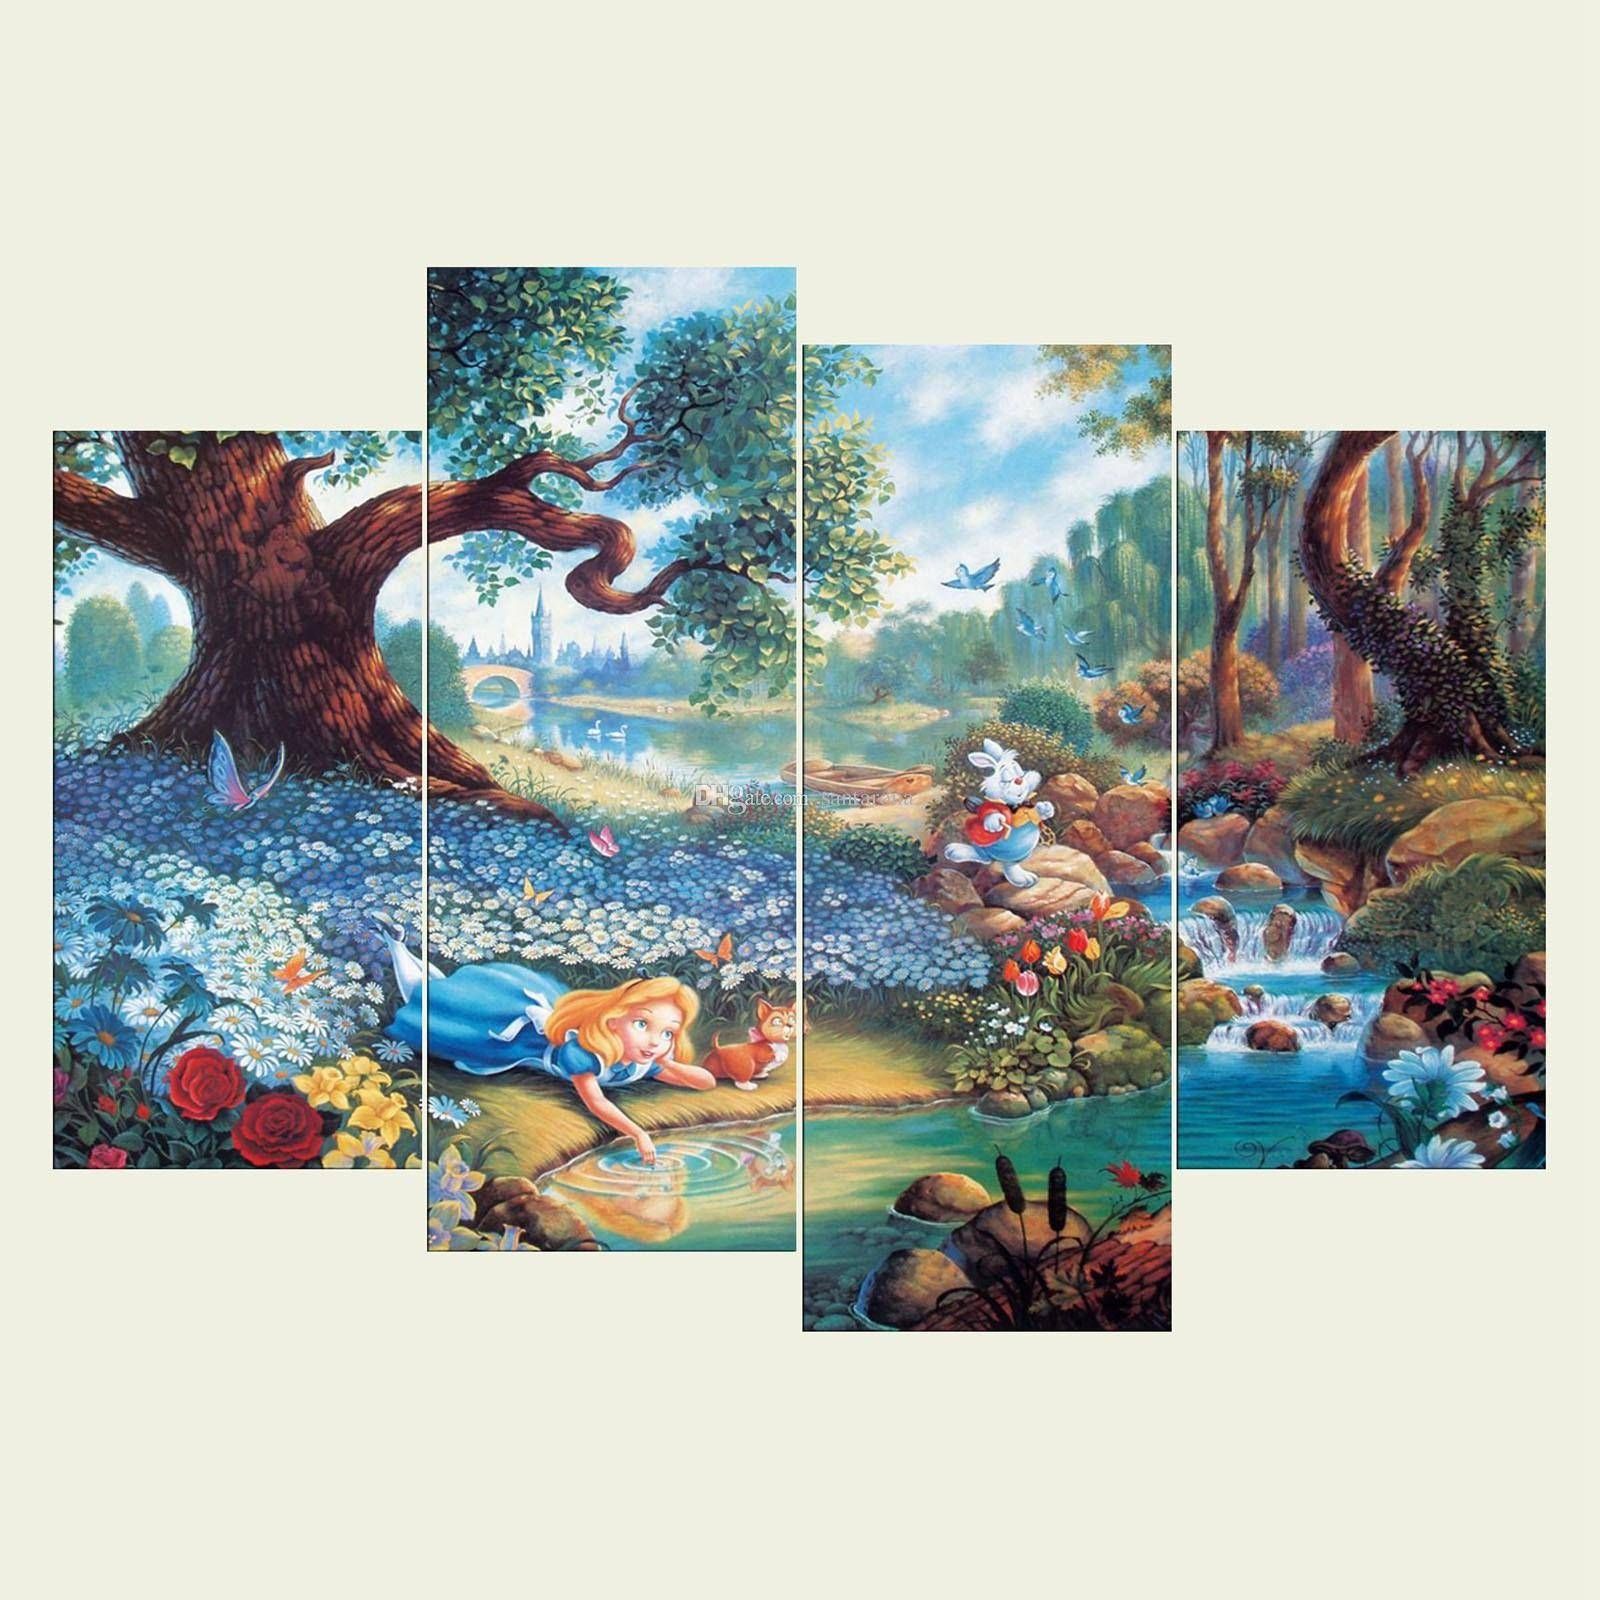 2018 No Frame Disney Cartoon Posters Series Hd Canvas Print Wall Pertaining To Most Recently Released Disney Canvas Wall Art (View 10 of 20)